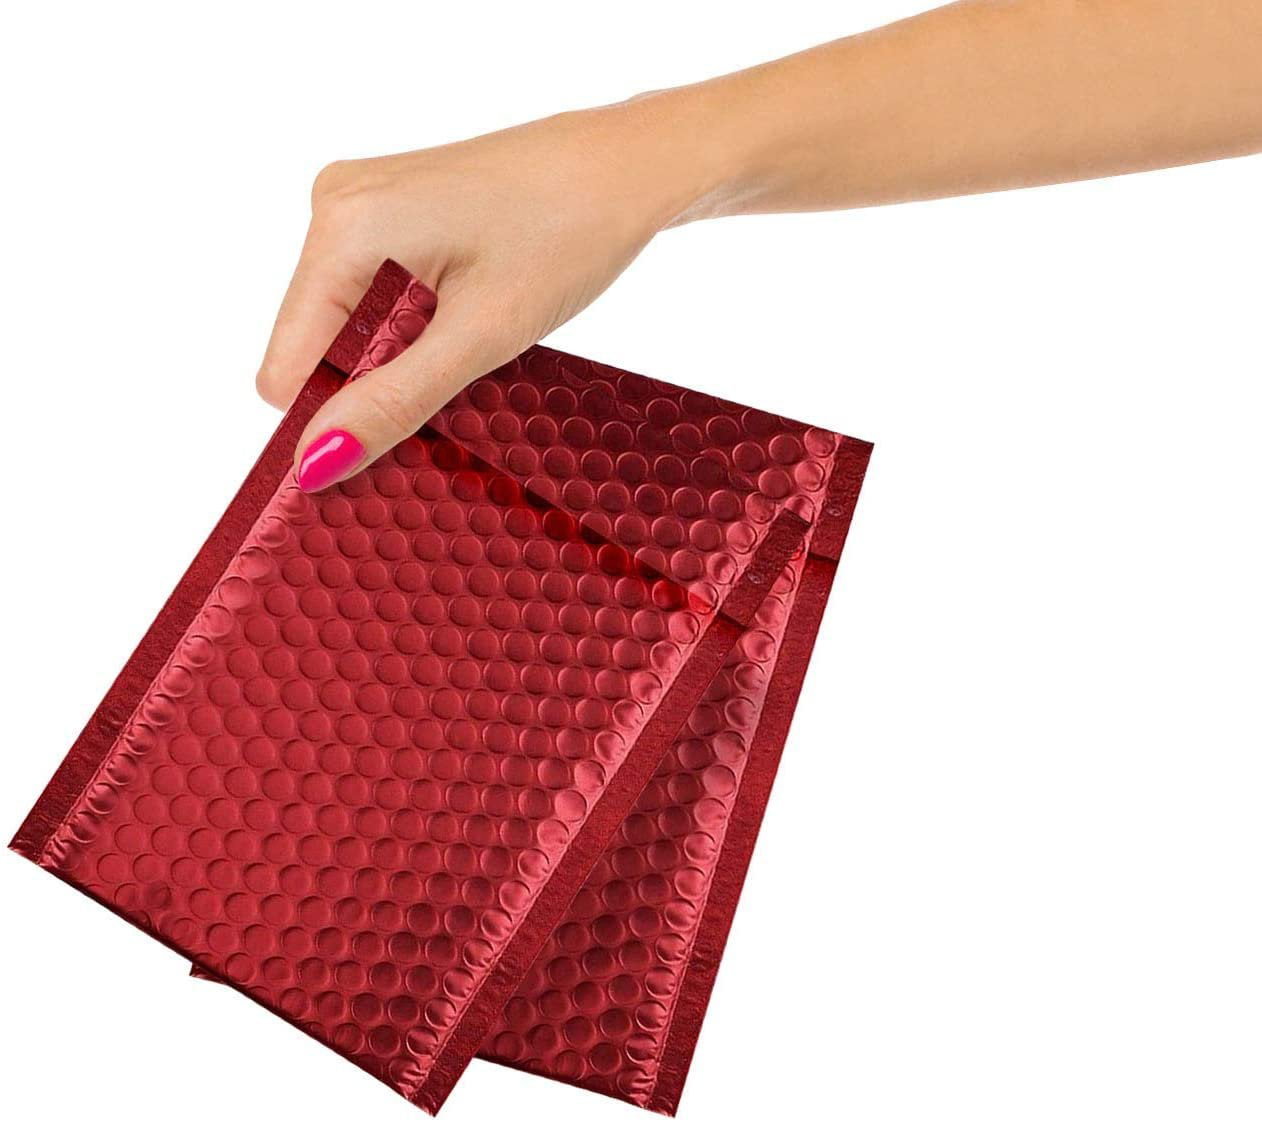 Metallic Matte Red Bubble Mailers Mailing Padded Envelopes 4x8 Inch Self-seal Closure Bubble Shipping Bag 25pcs